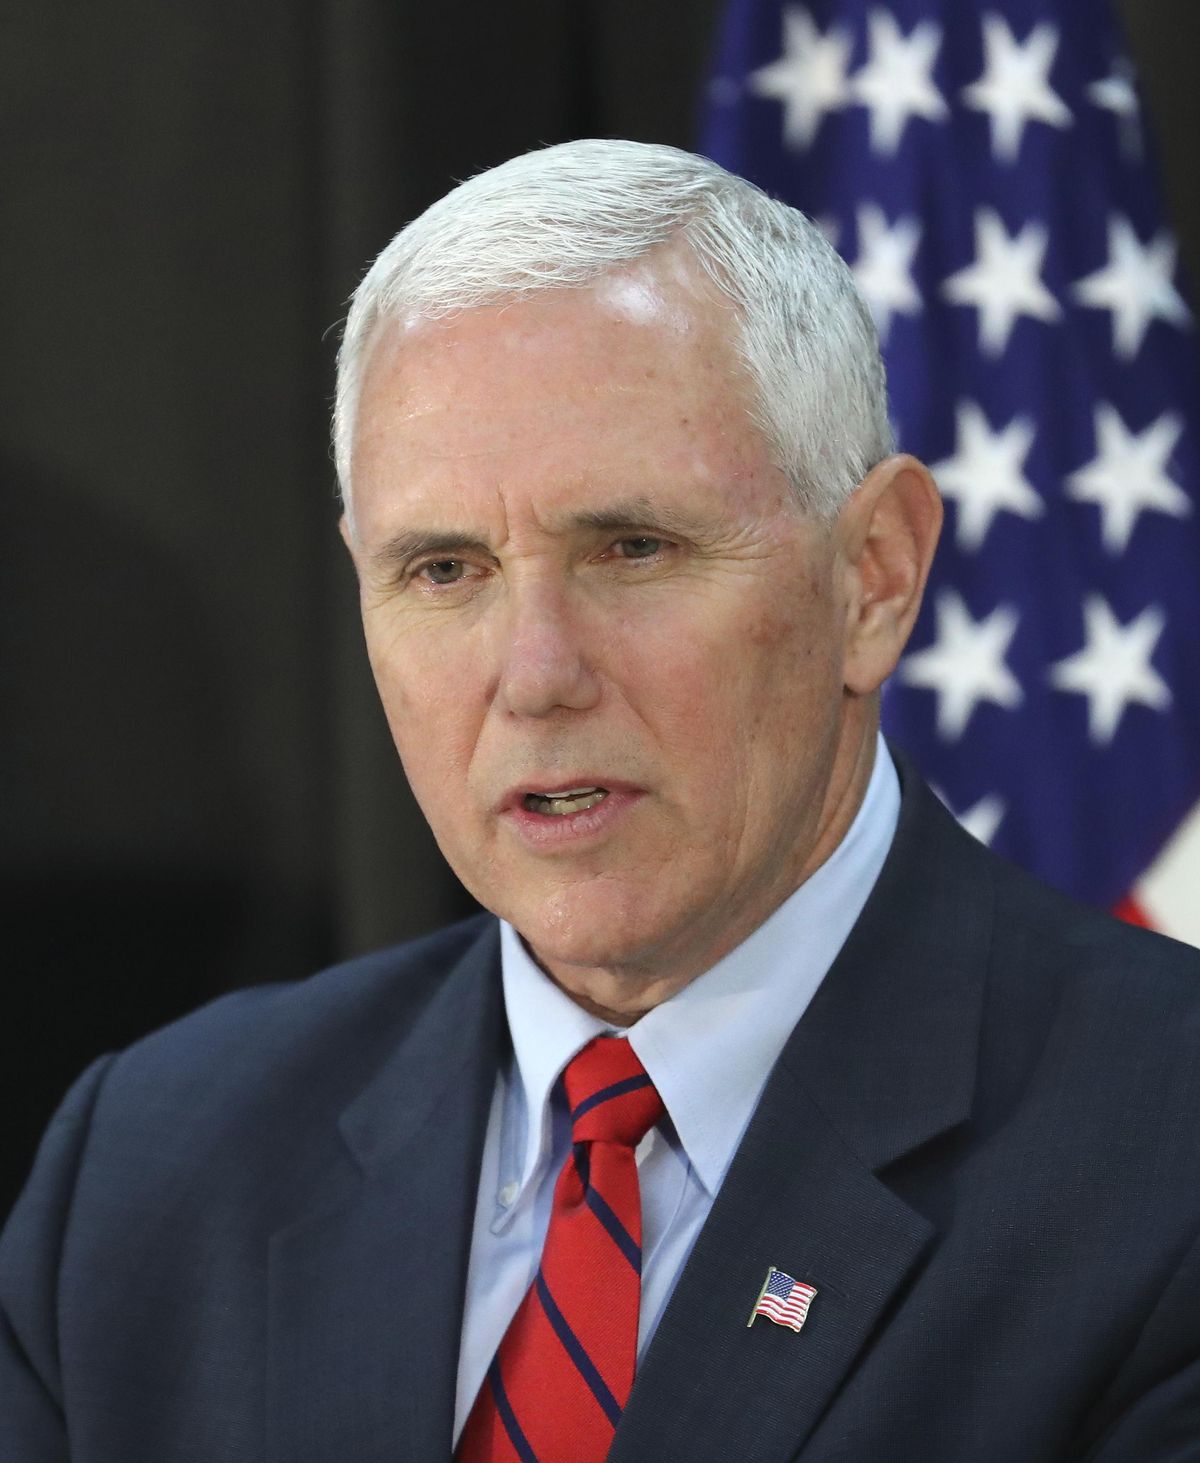 U.S. Vice President Mike Pence speaks during a dinner with soldiers and family members after Easter Sunday church services at a military base in Seoul, South Korea, Sunday, April 16, 2017.  Pence said Sunday that North Korea’s “provocation” underscored the risks faced by American and South Korean service members, hours after the North conducted a failed missile launch shortly before Pence’s arrival. (Lee Jin-man / Associated Press)